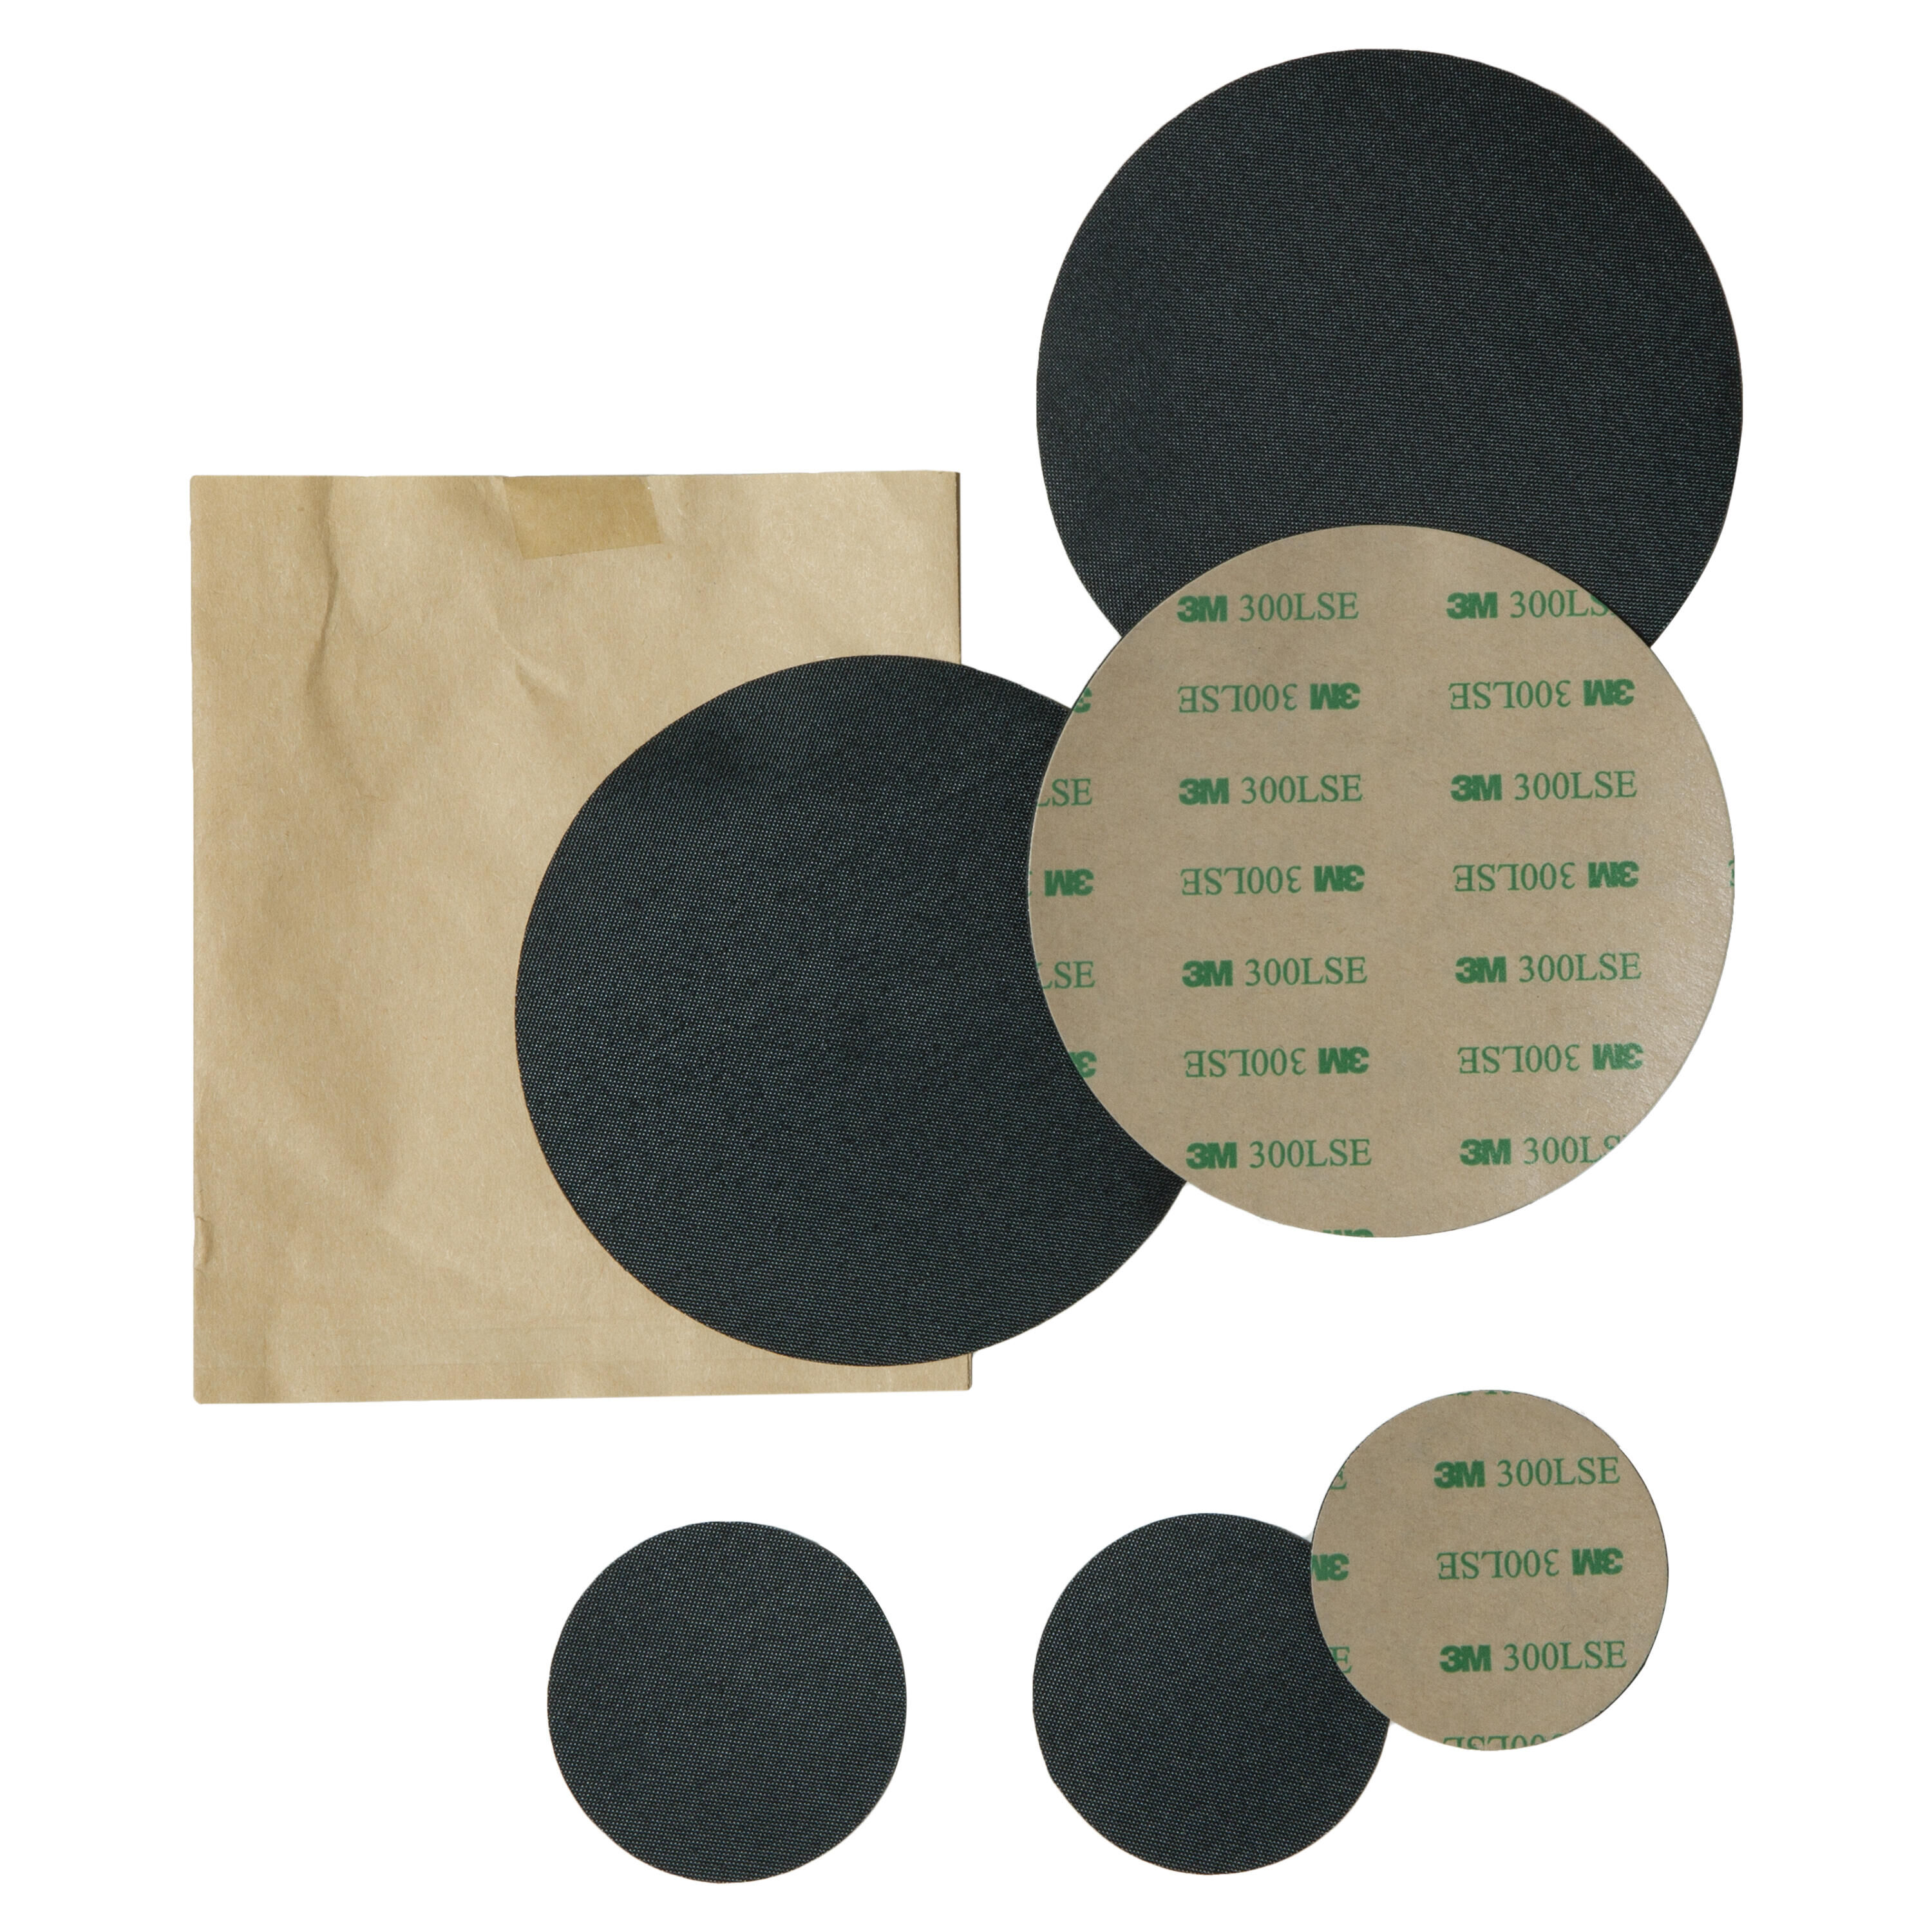 ITIWIT Quick repair kit for inflatable products in thermoplastic polyurethane (TPU)